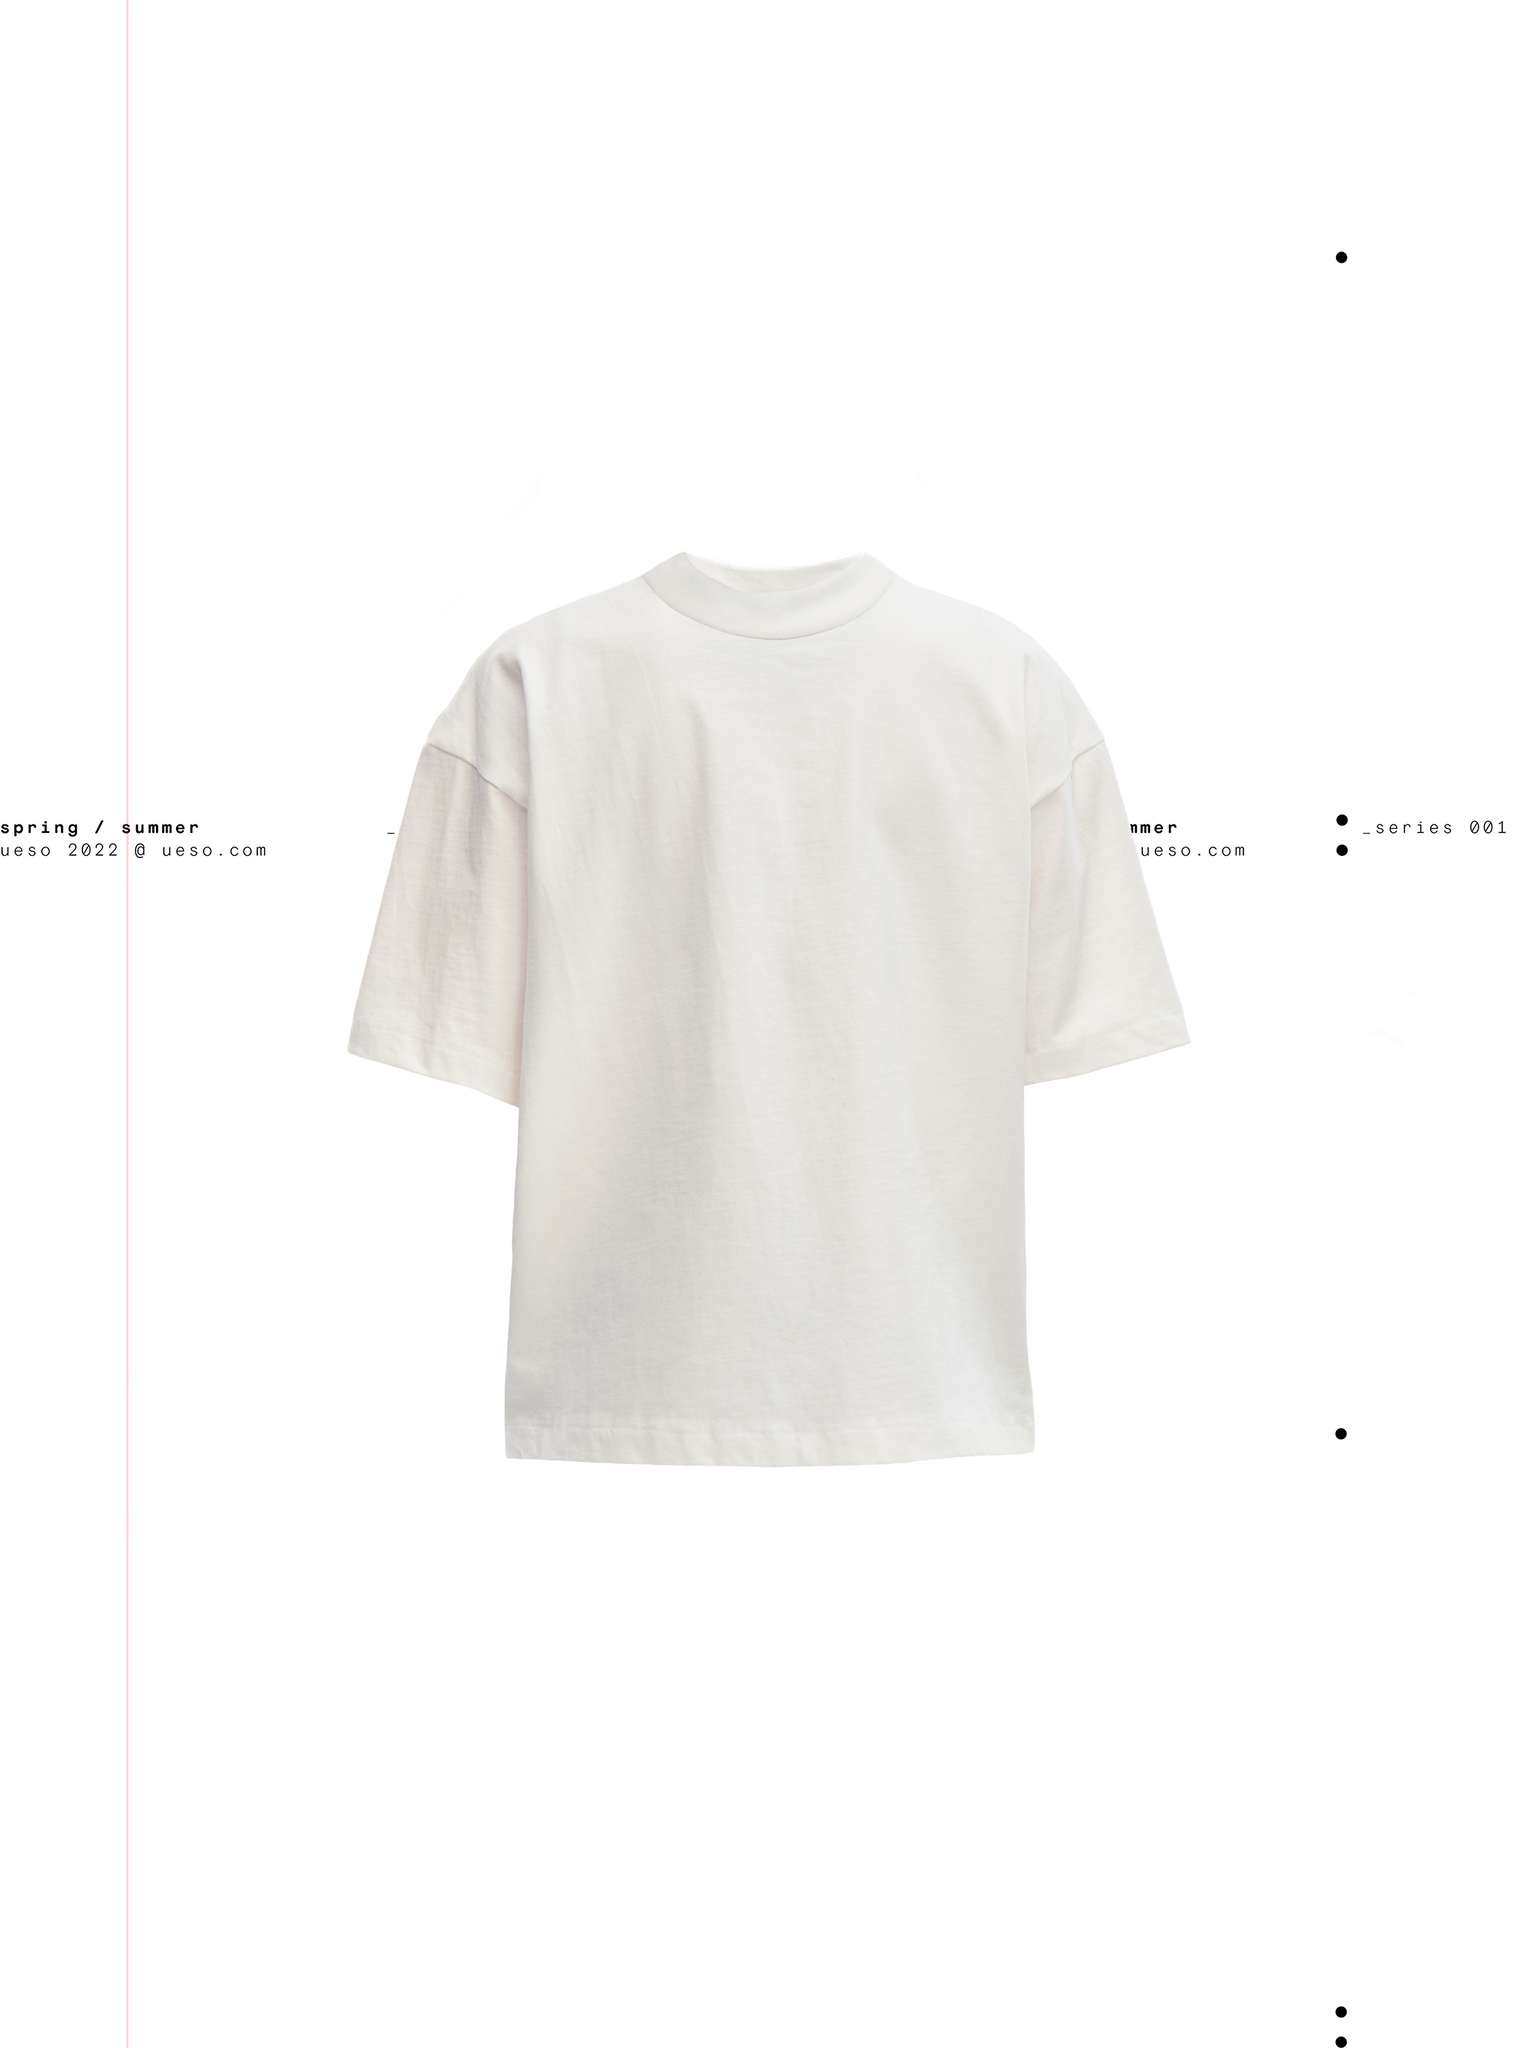 lona t-shirt in off-white